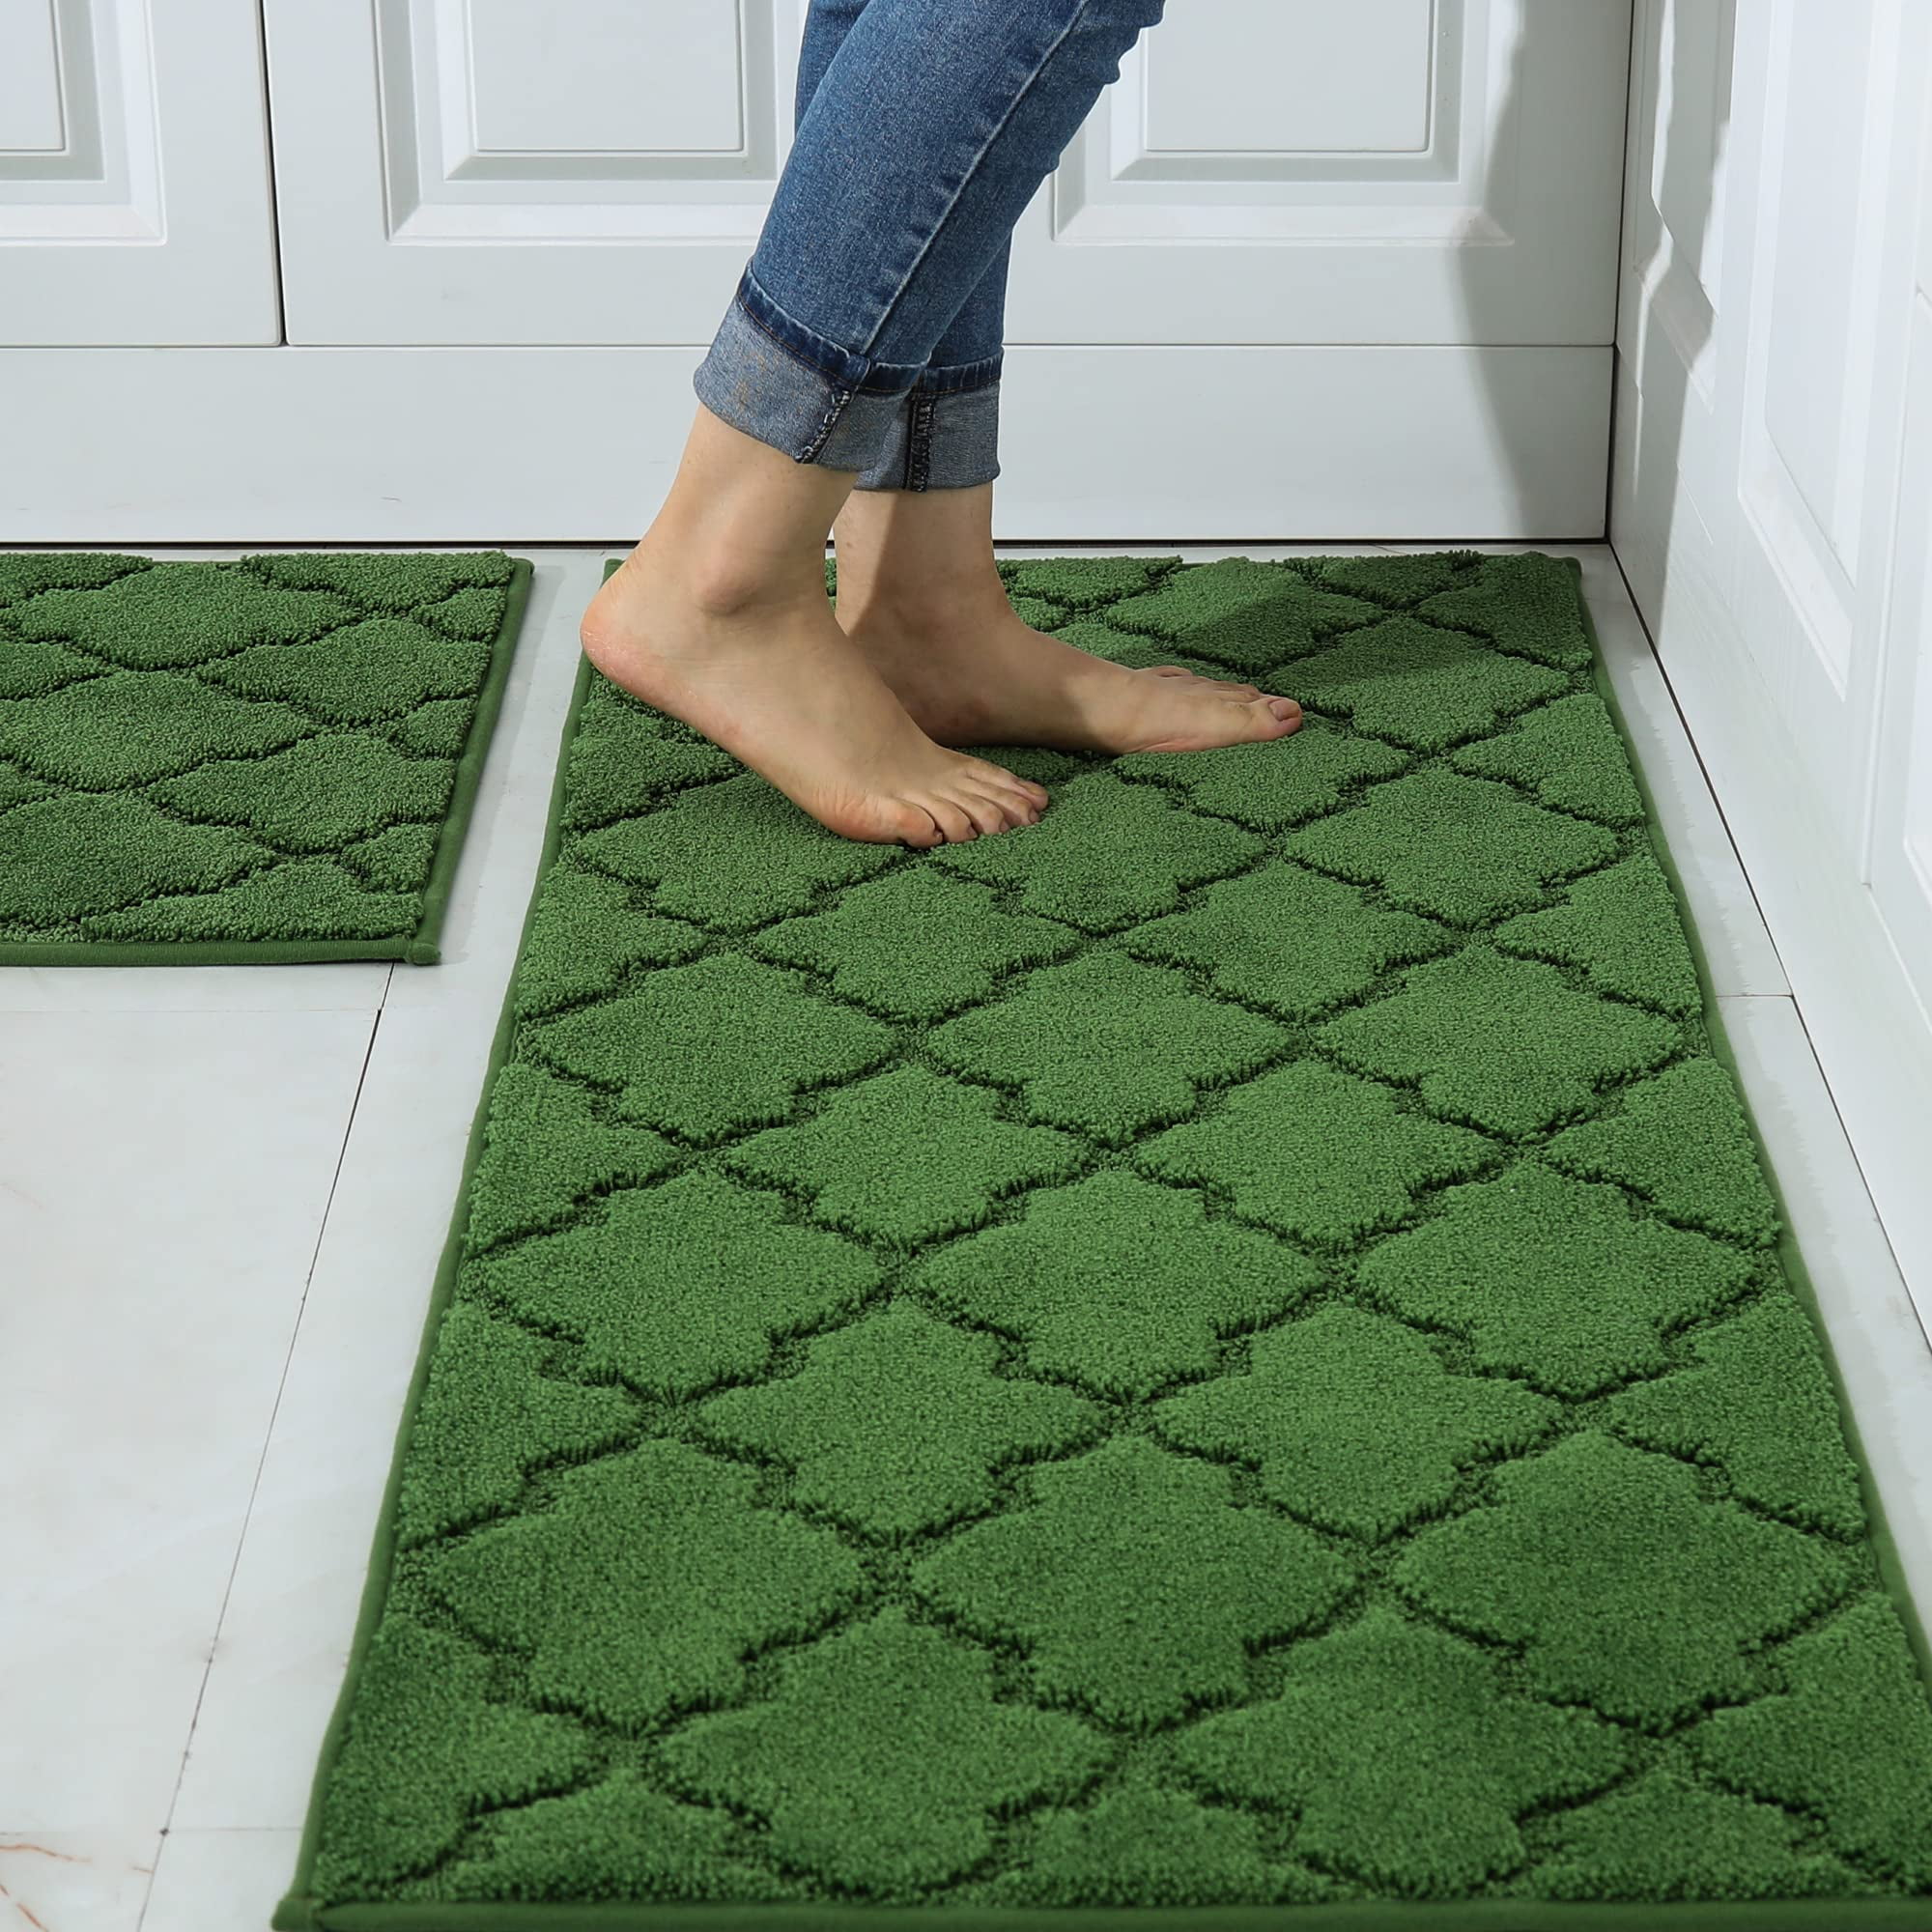 Non Slip Rubber Pack Floor/Kitchen Mats with Christmas Themes, 30x20 -  20x30 - On Sale - Bed Bath & Beyond - 32489707